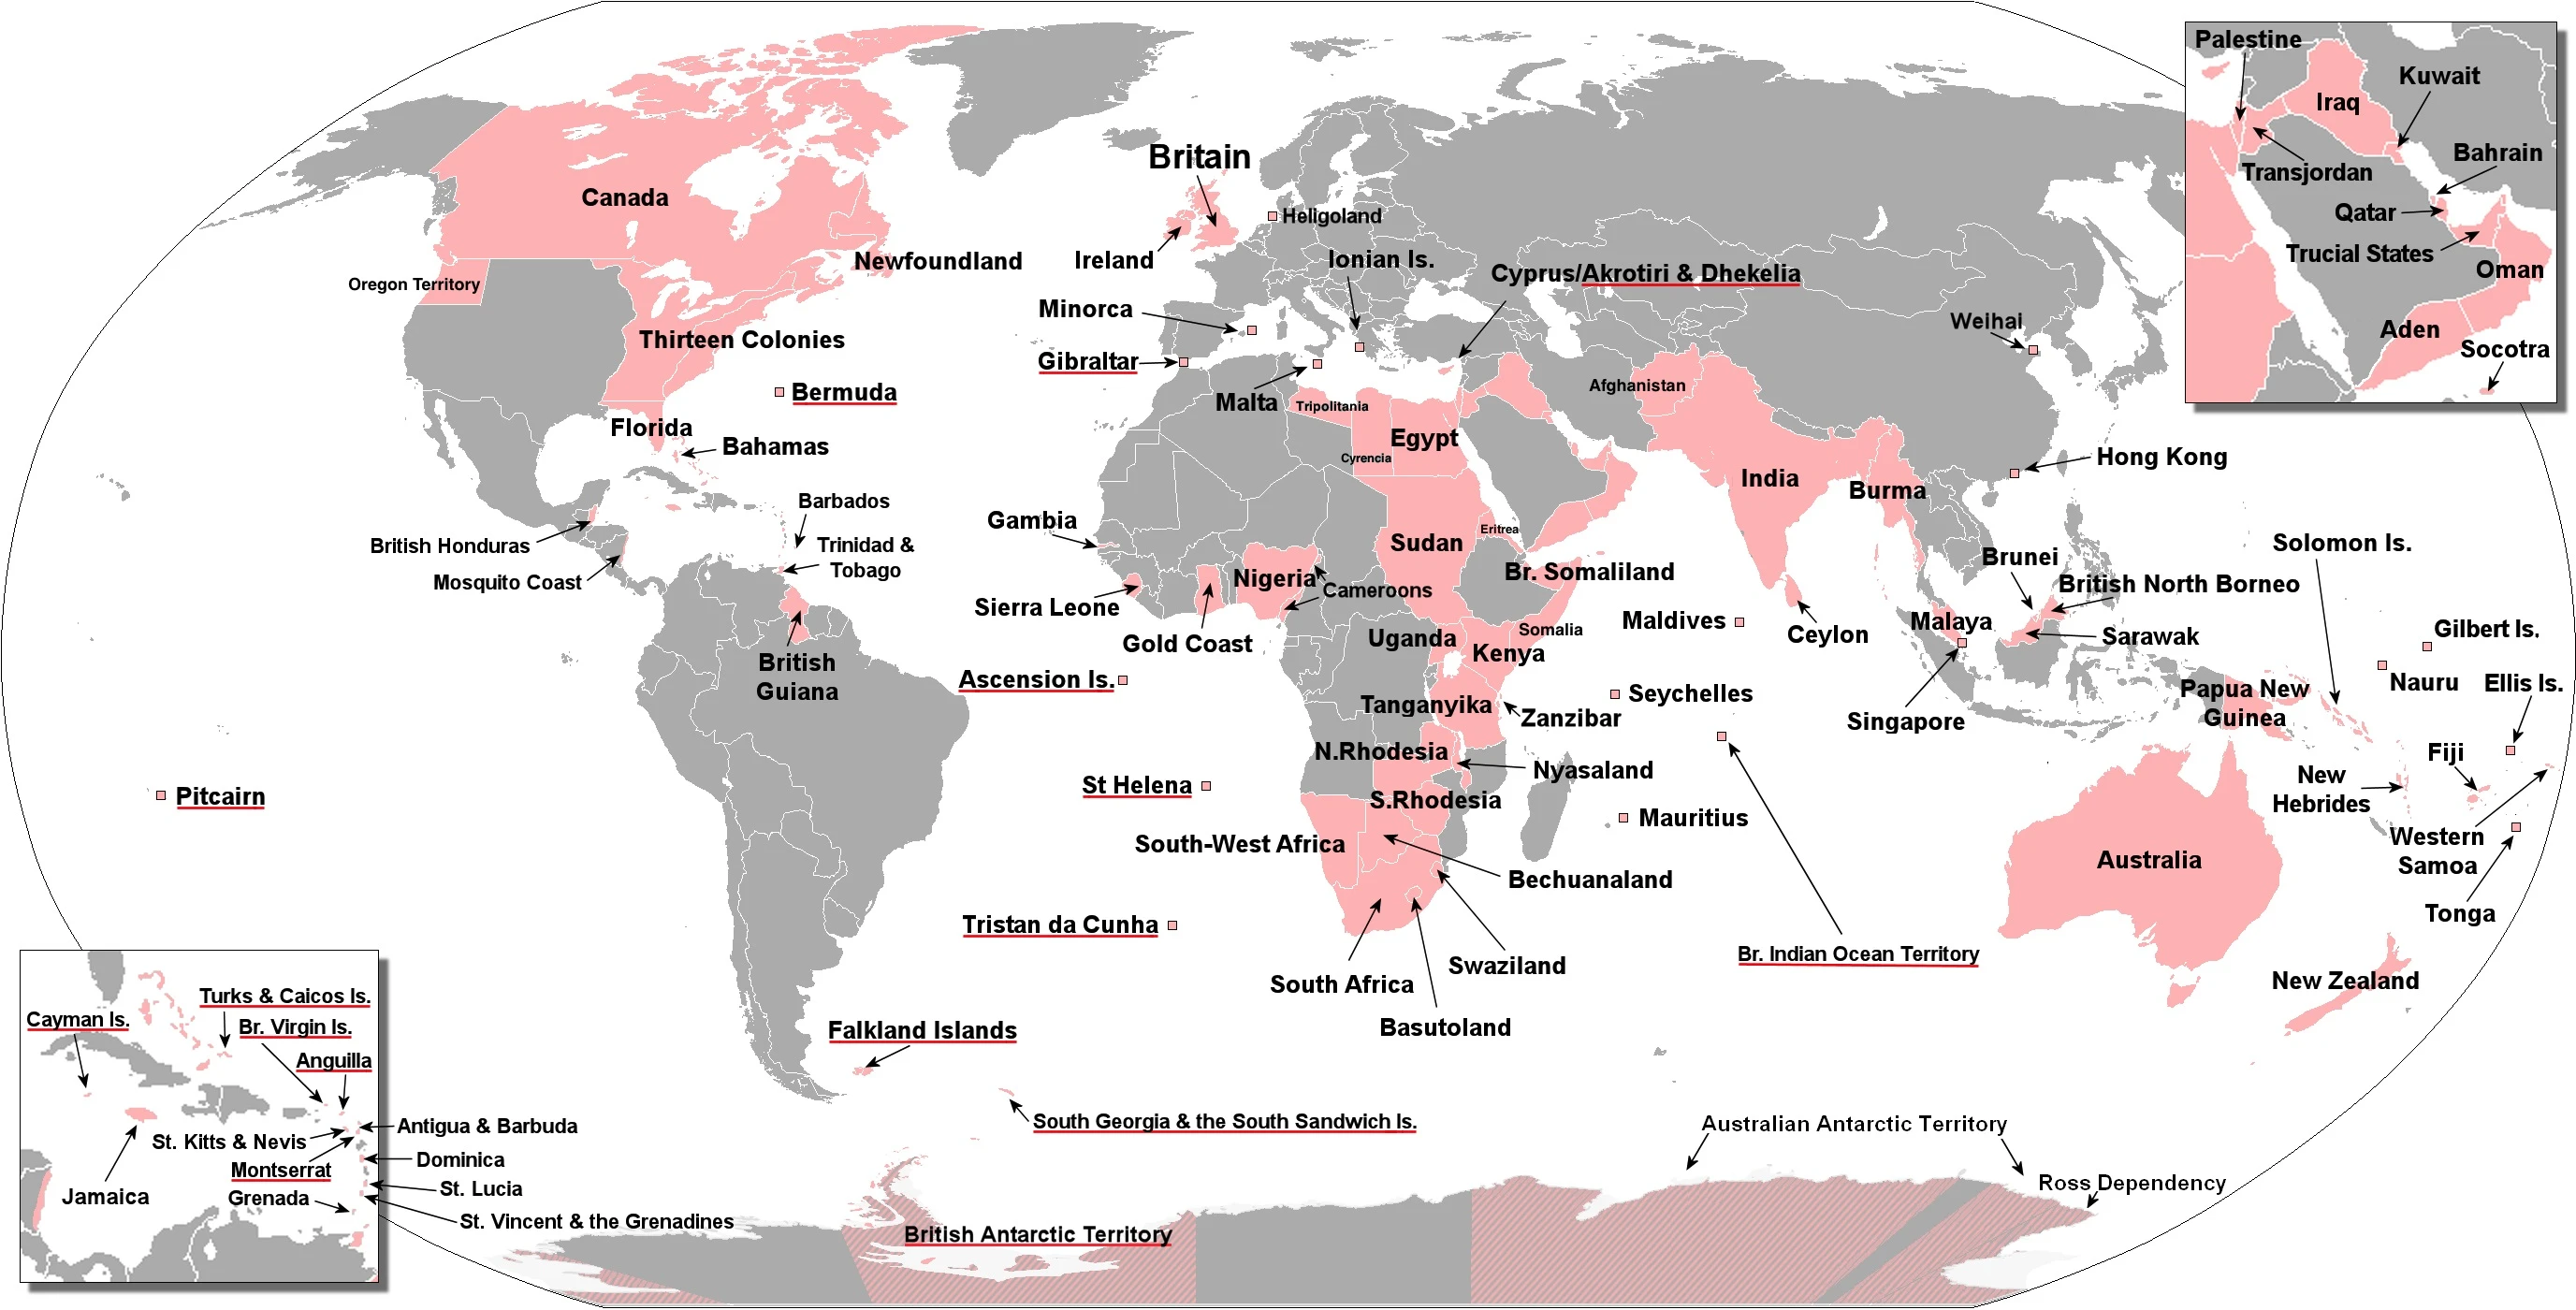 The British Empire at the height of rule, and how British DNA was spread around the world